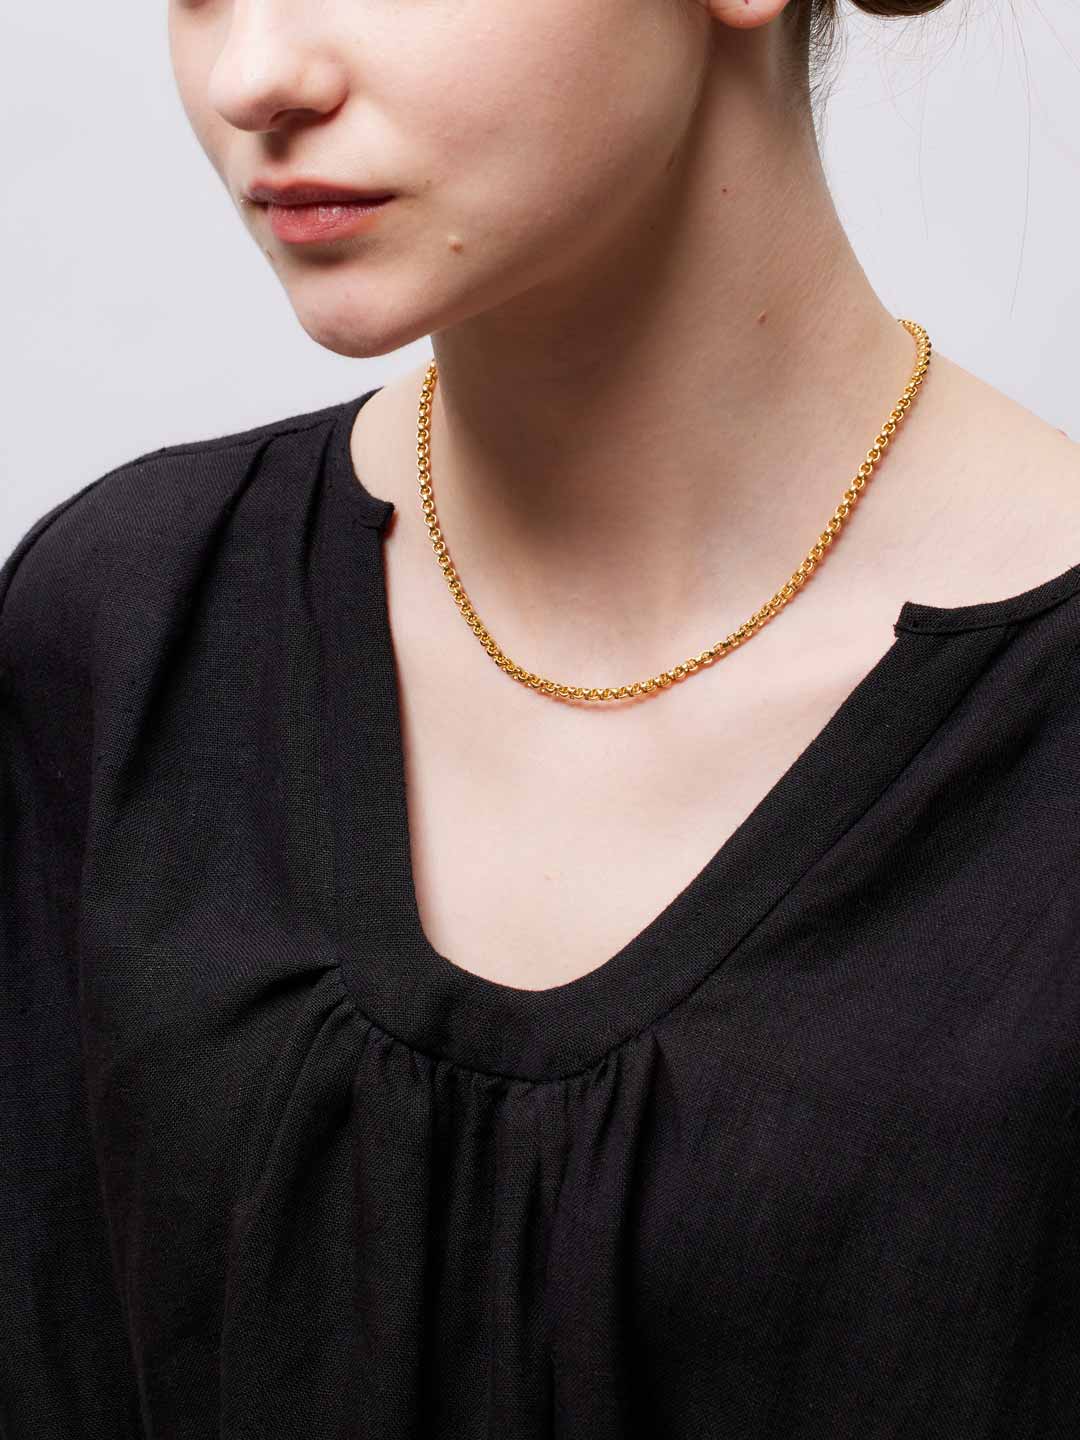 Suzanne Chain Necklace - Gold